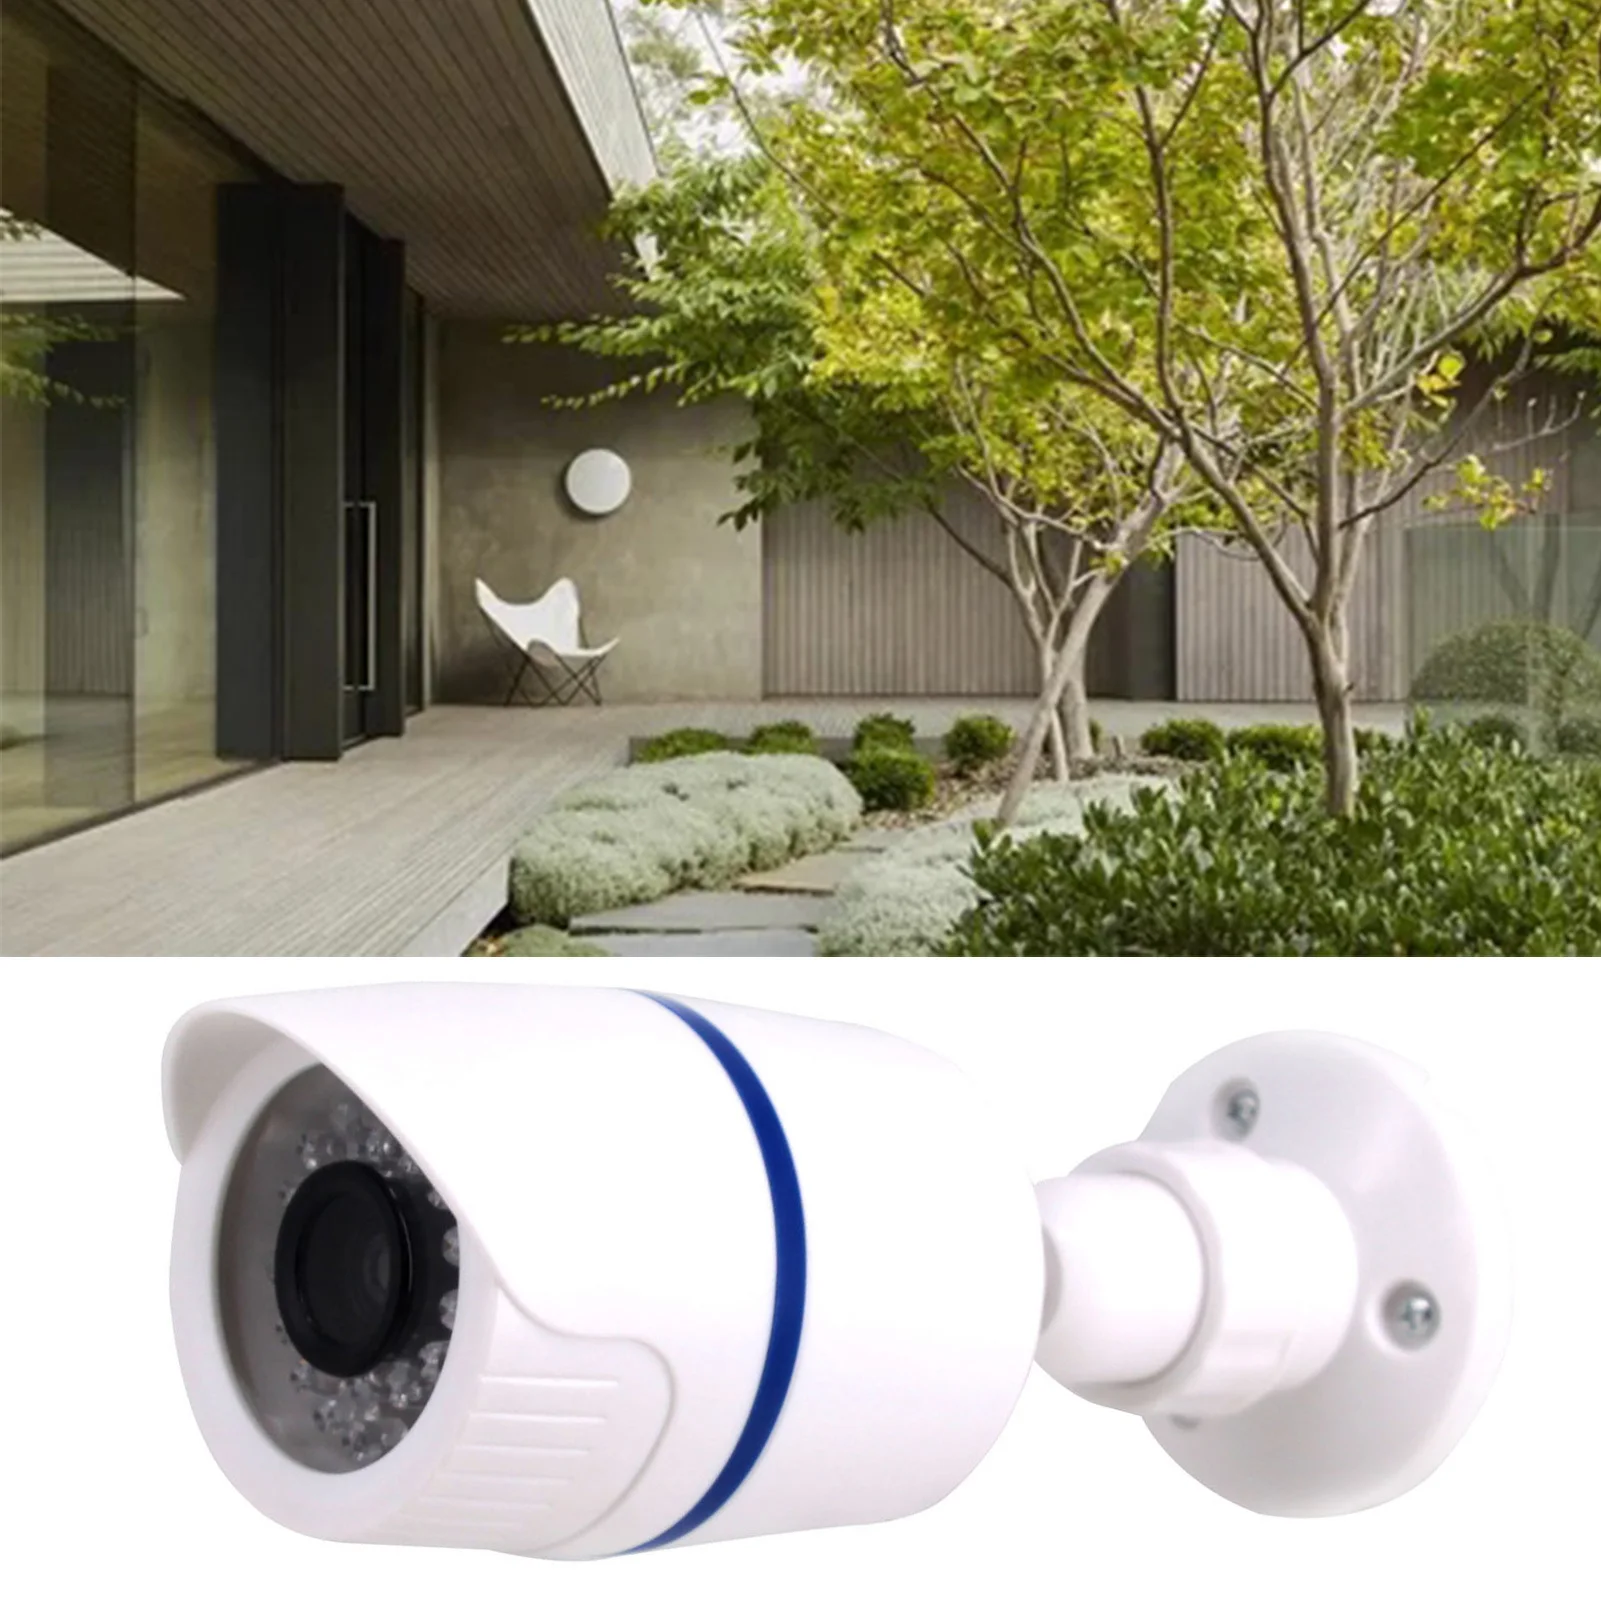 Home CCTV Indoor Camera with Long Distance Remote Control for Home Security Night Vision